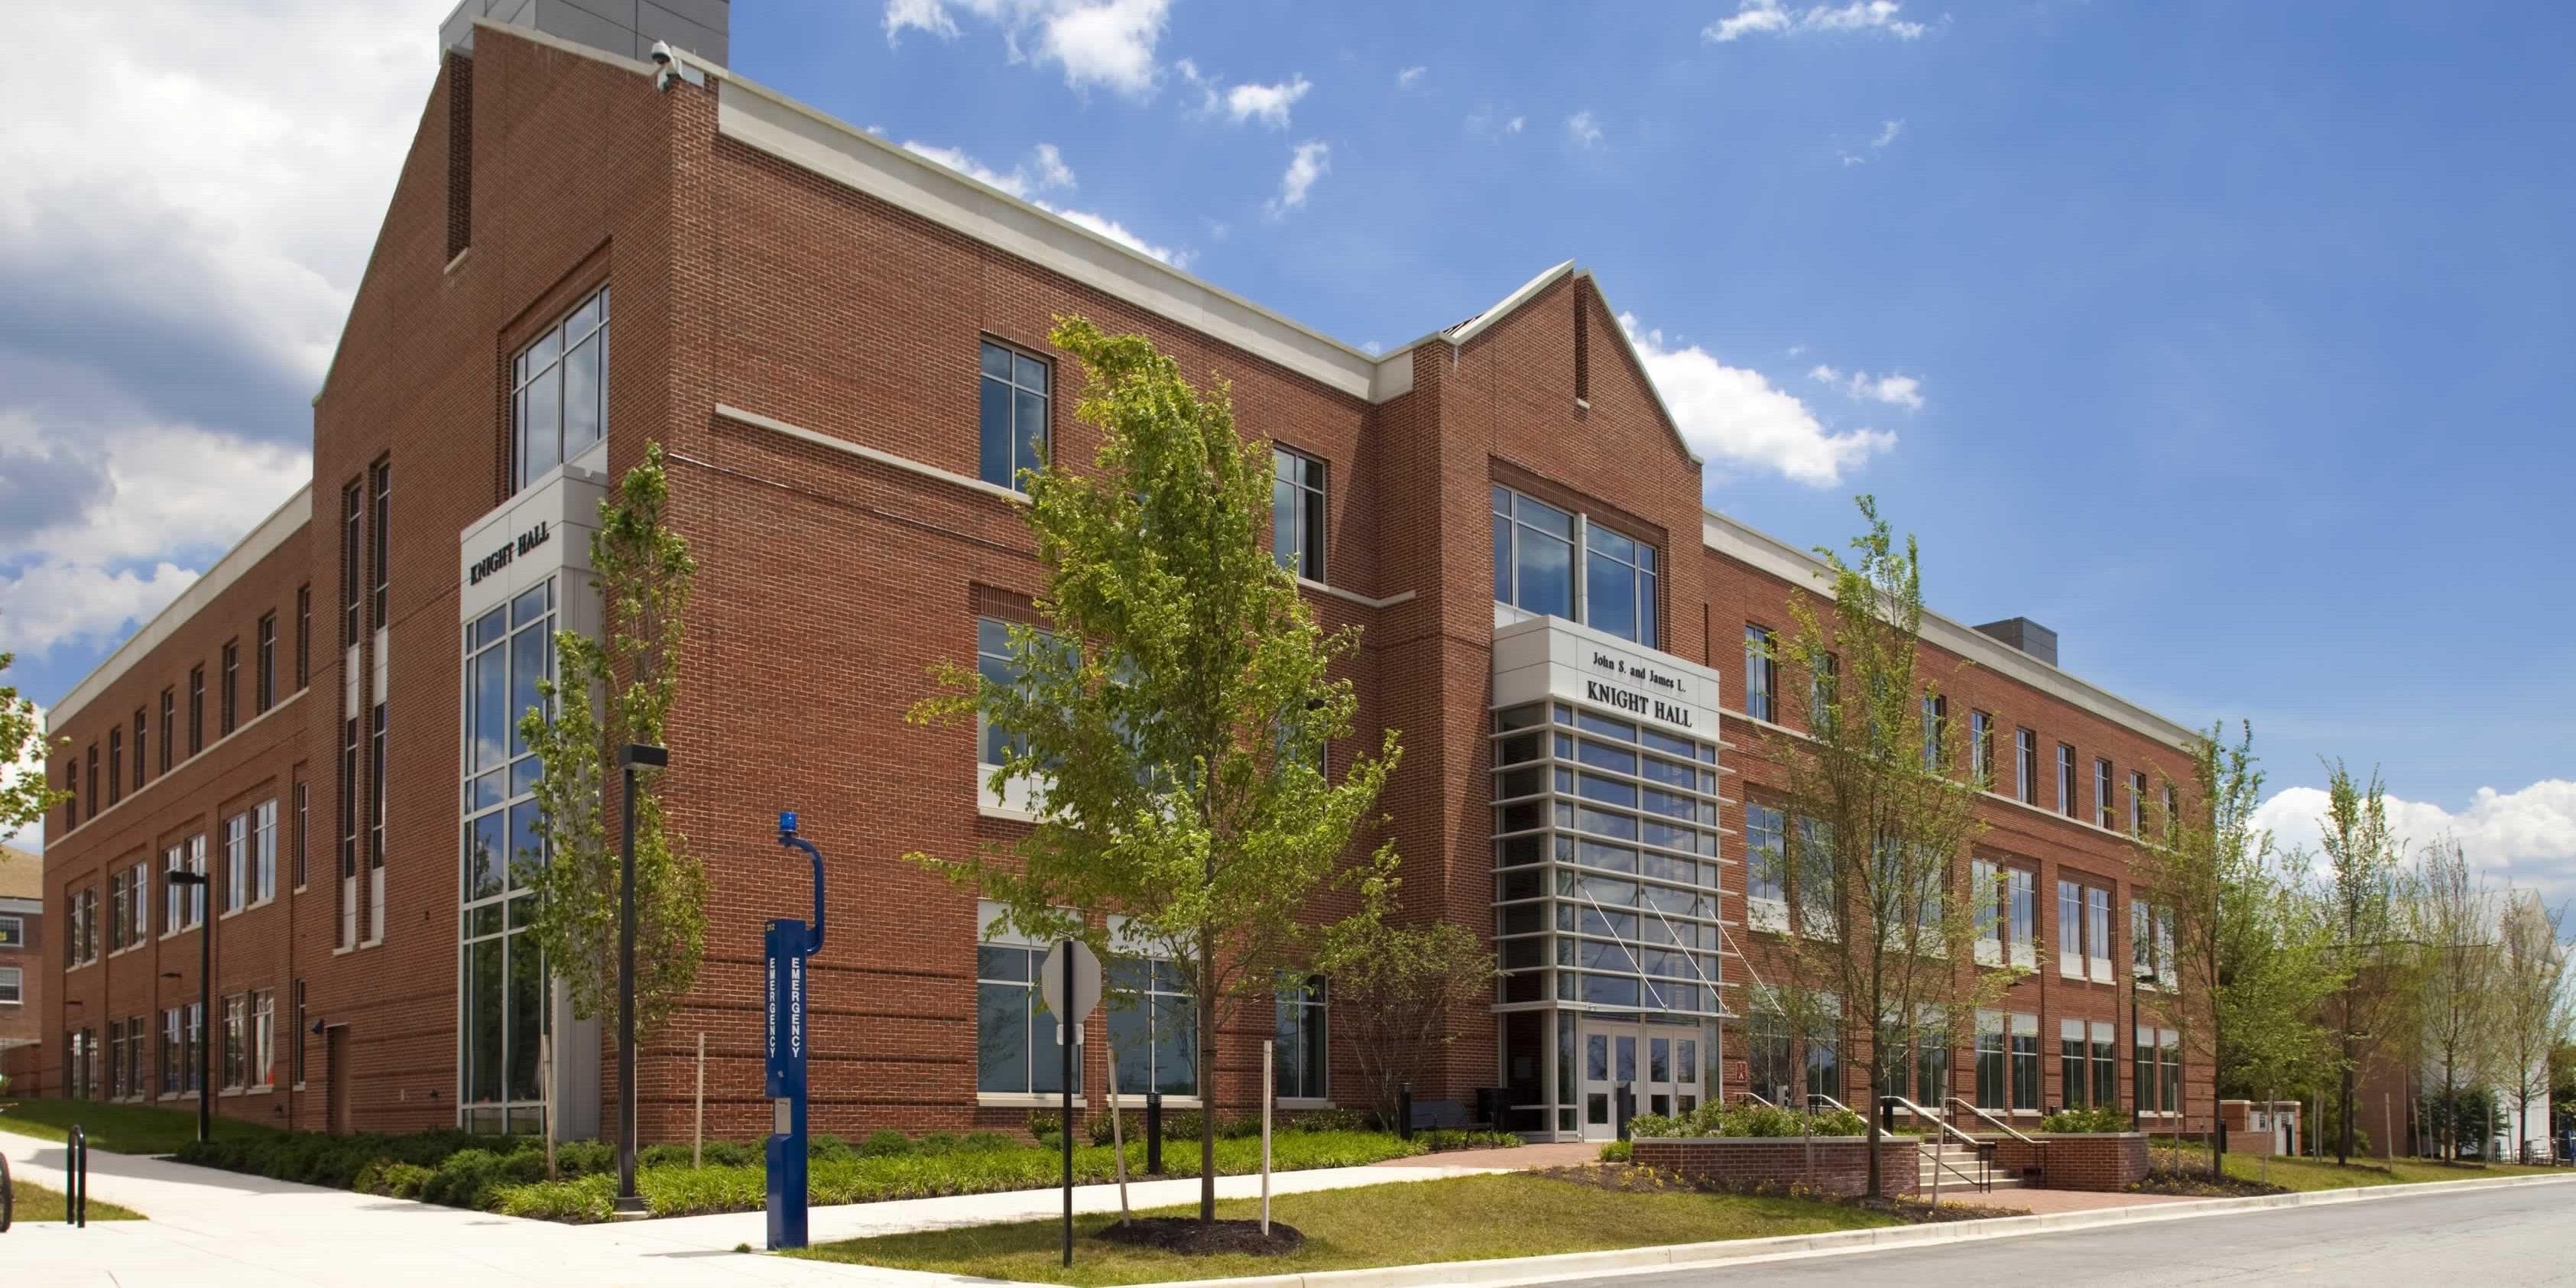 Knight Hall, part of the Philip Merrill College of Journalism at the University of Maryalnd